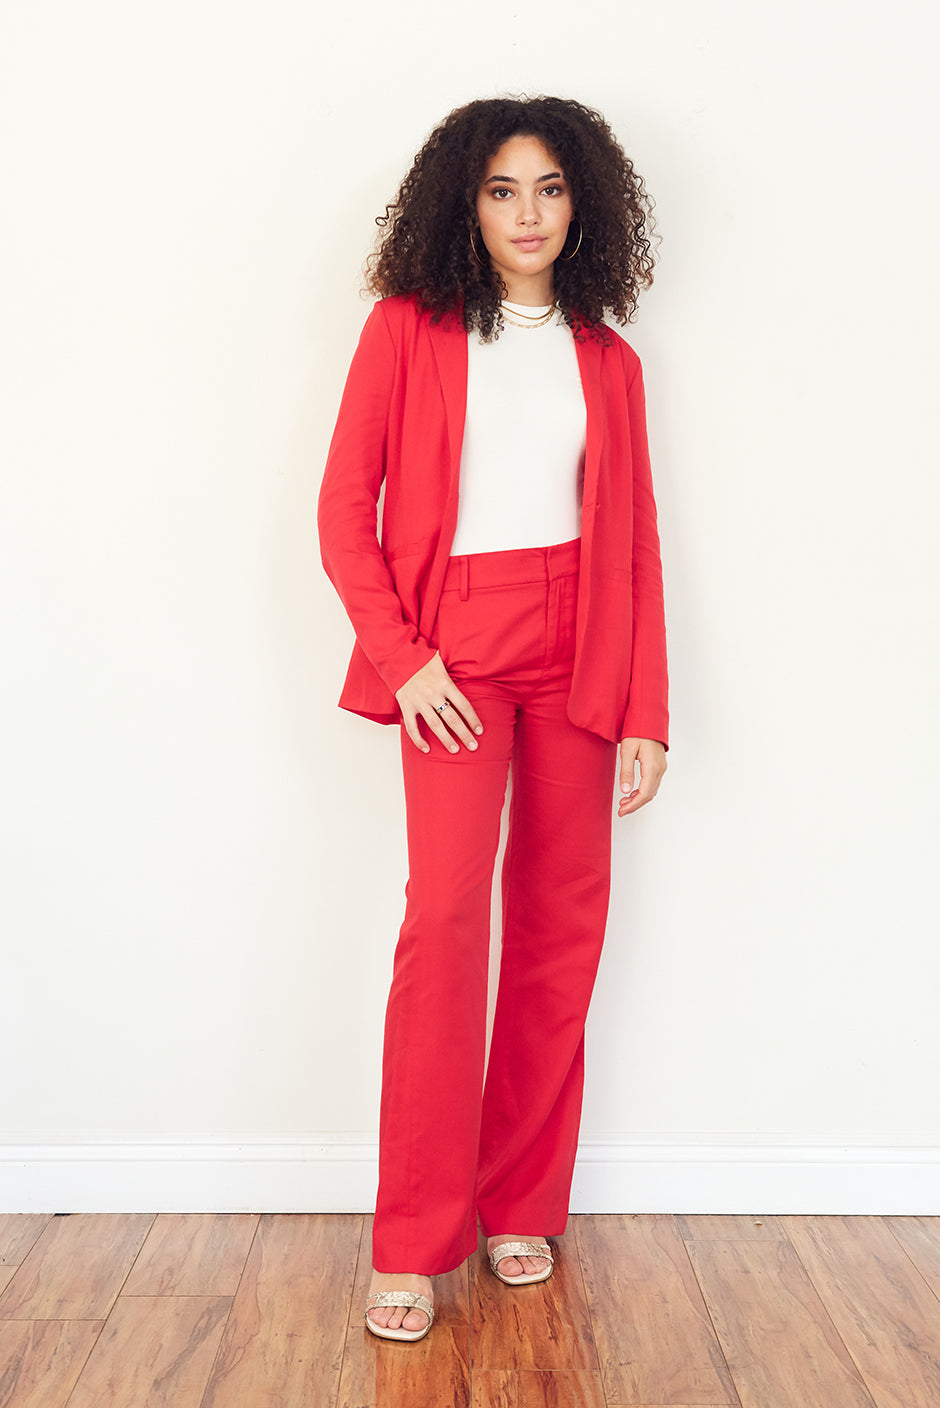 Day to Night Trouser in Cherry Punch front view by Paneros Clothing